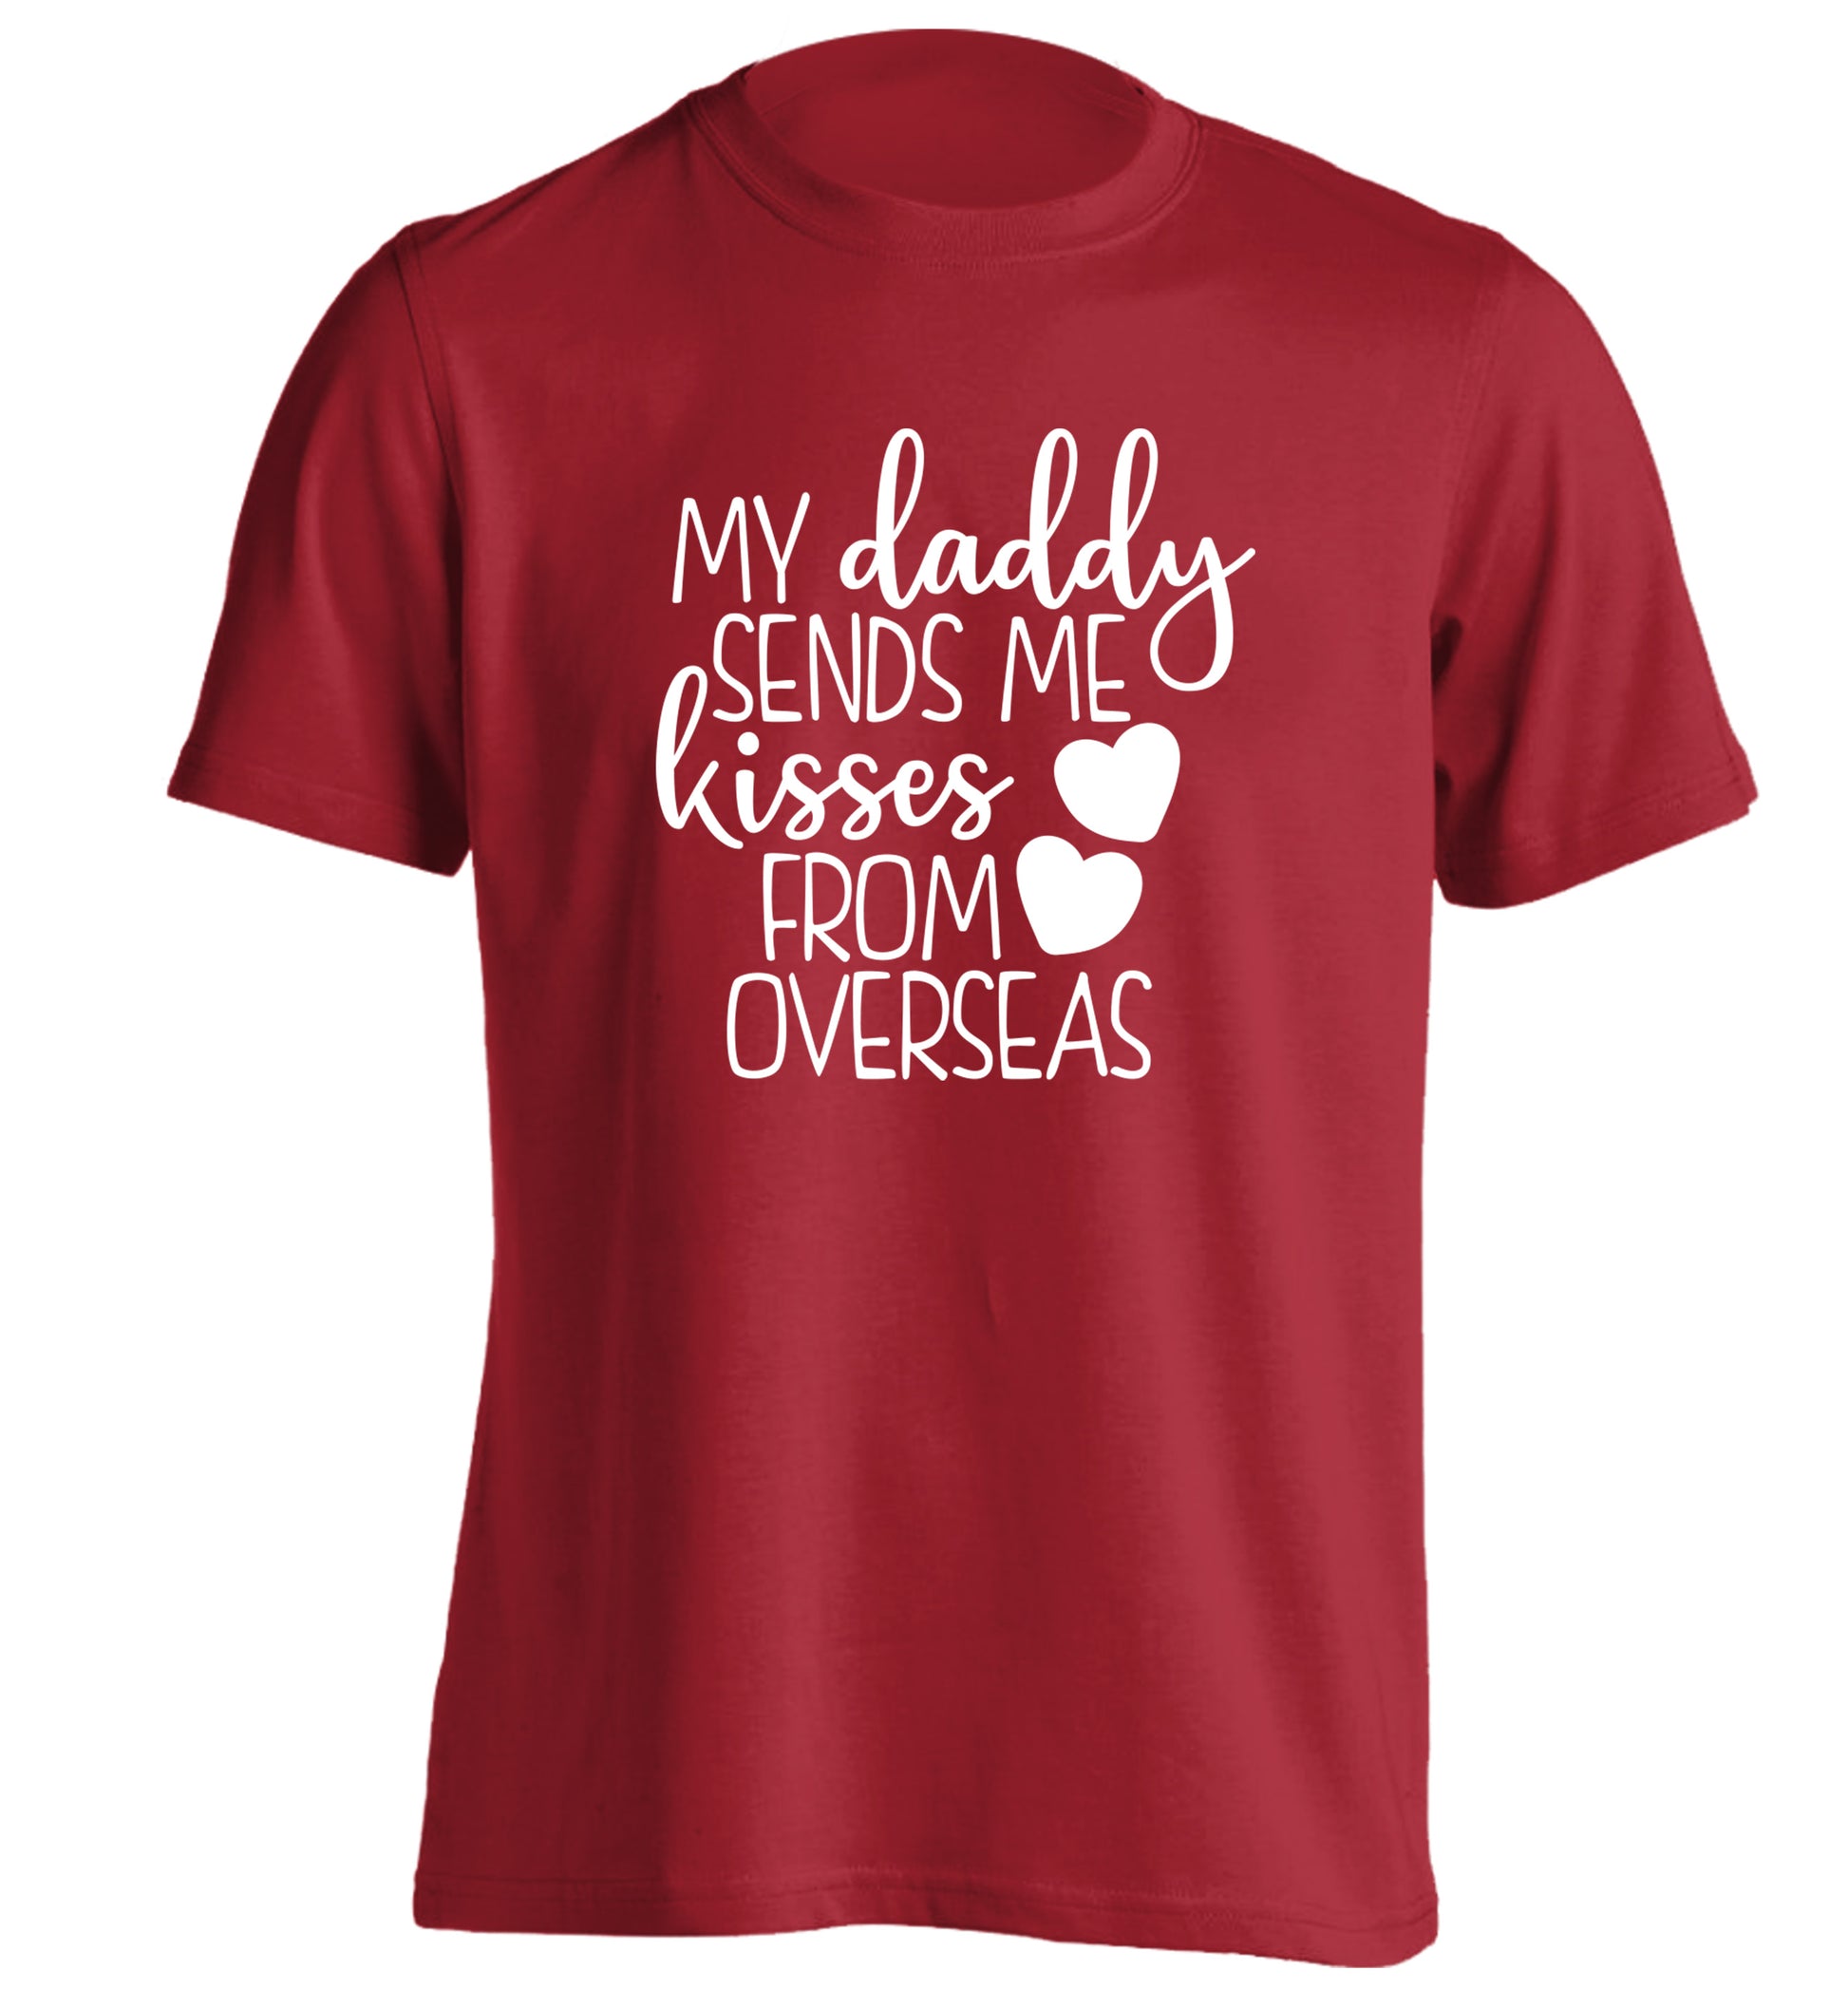 My daddy sends me kisses from overseas adults unisex red Tshirt 2XL